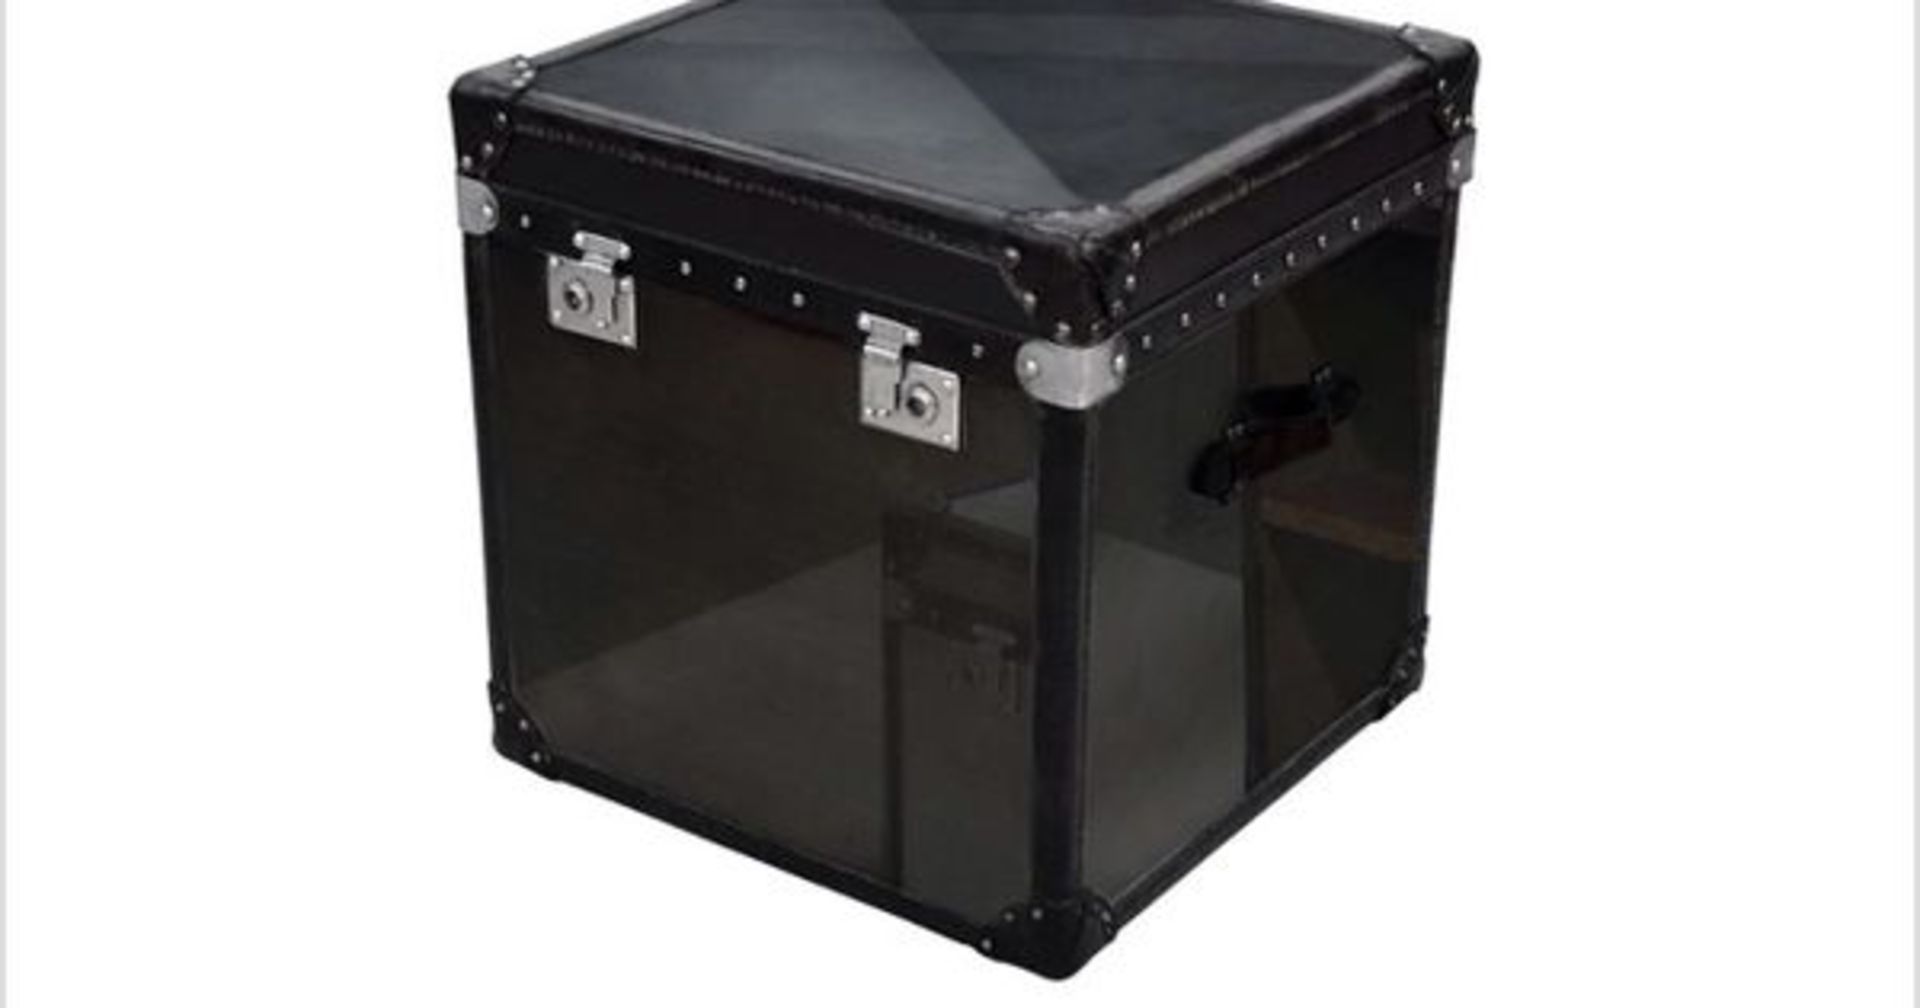 Paris Trunk Black Steel This Authentic Trunk Truly Speaks The Heritage Of The Brand Inspired By - Image 2 of 2